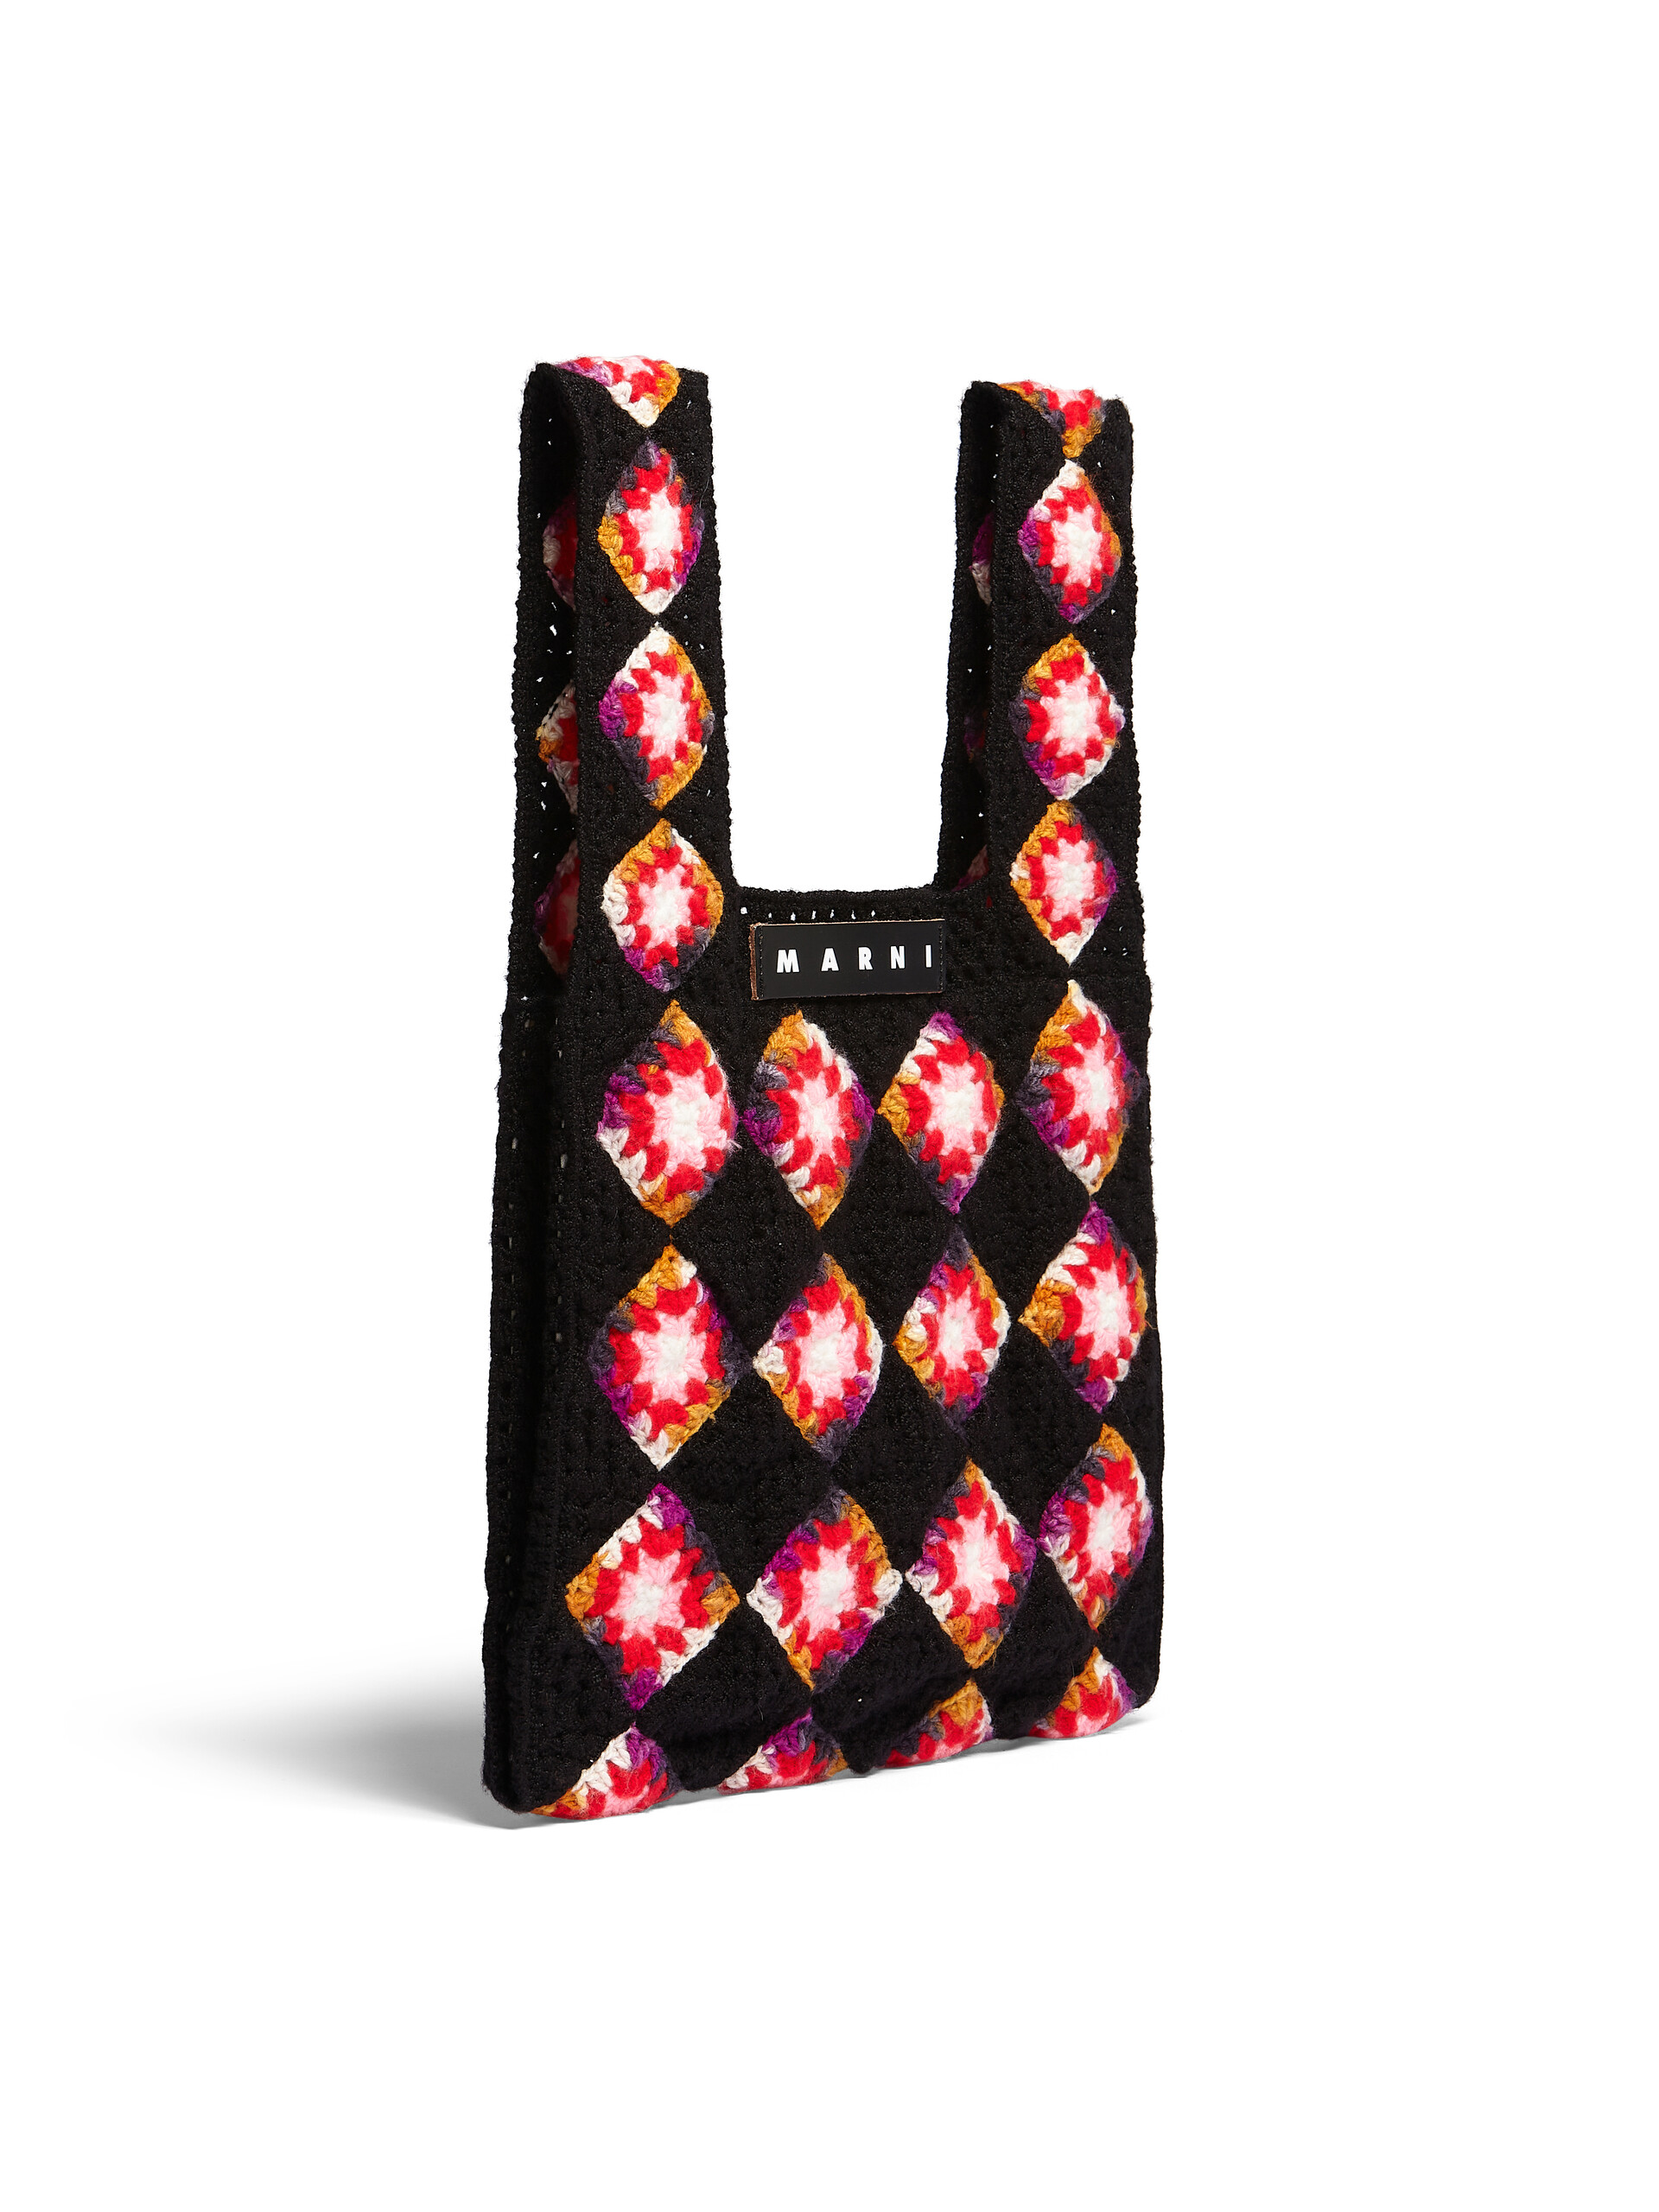 MARNI MARKET FISH in black and red crochet - Bags - Image 2